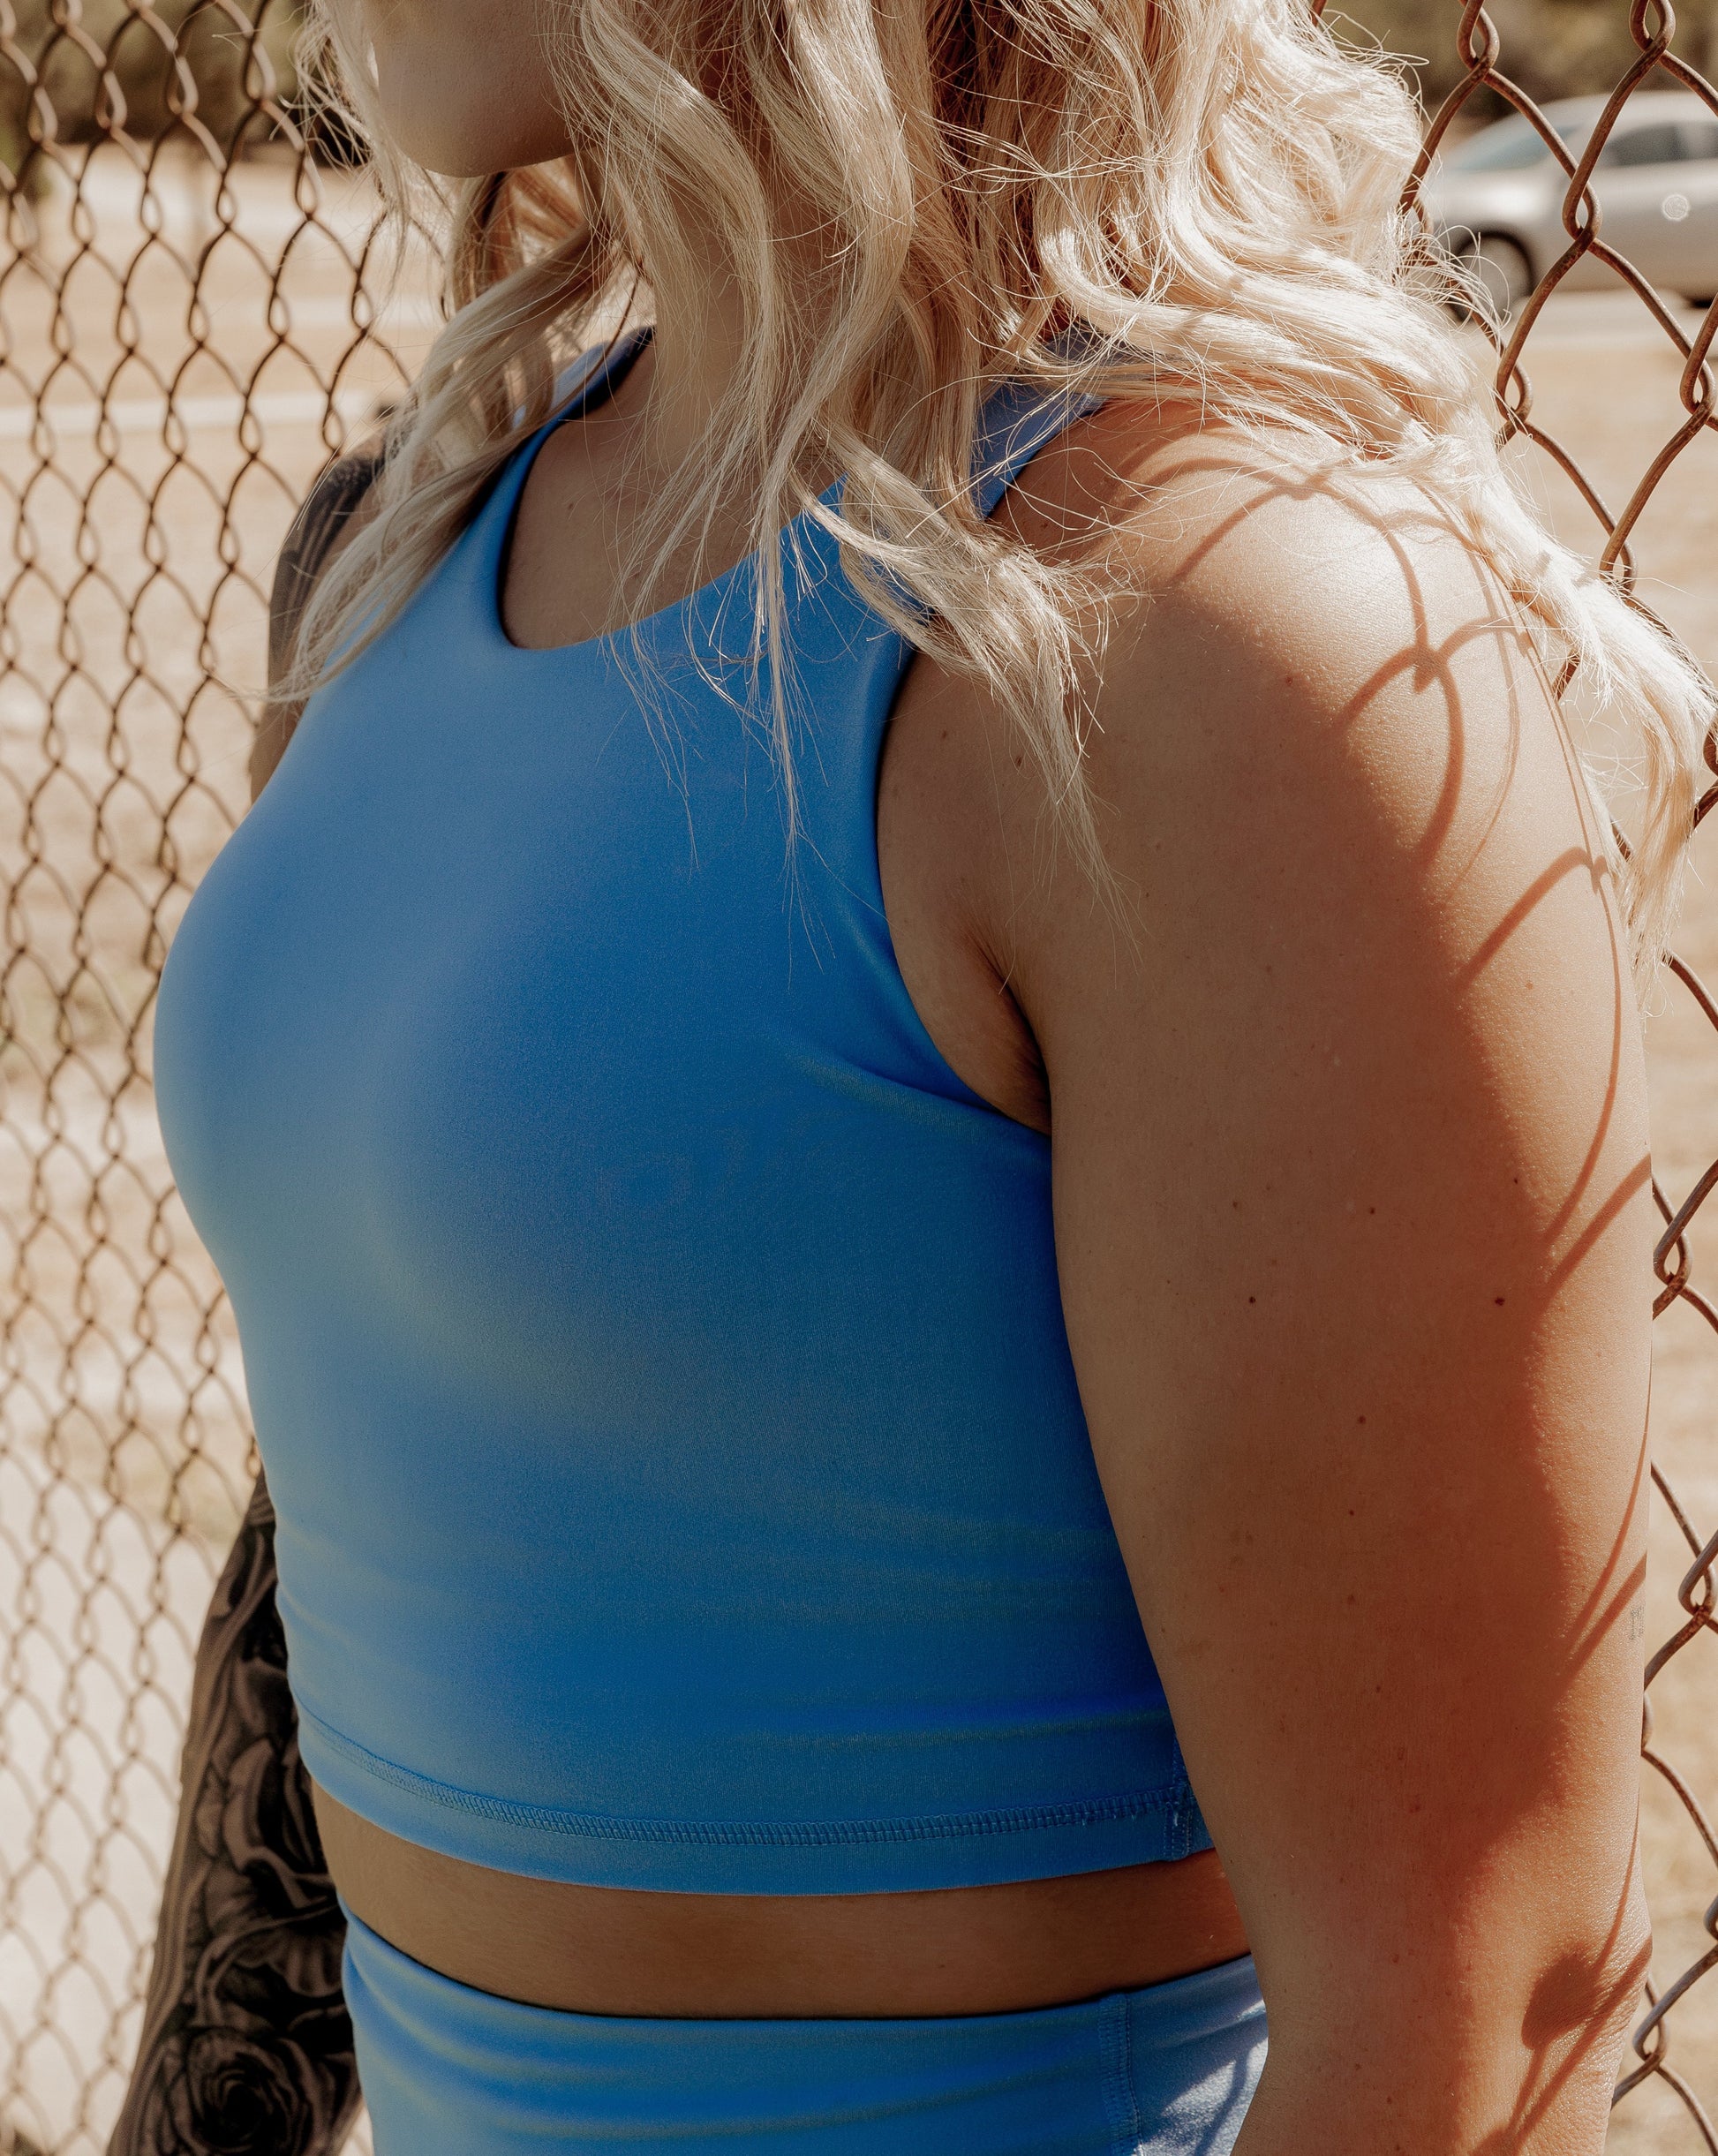 Blonde curly haired women up close on a bright blue tank top that she is wearing.  This photo is to show off the tank top and its features.